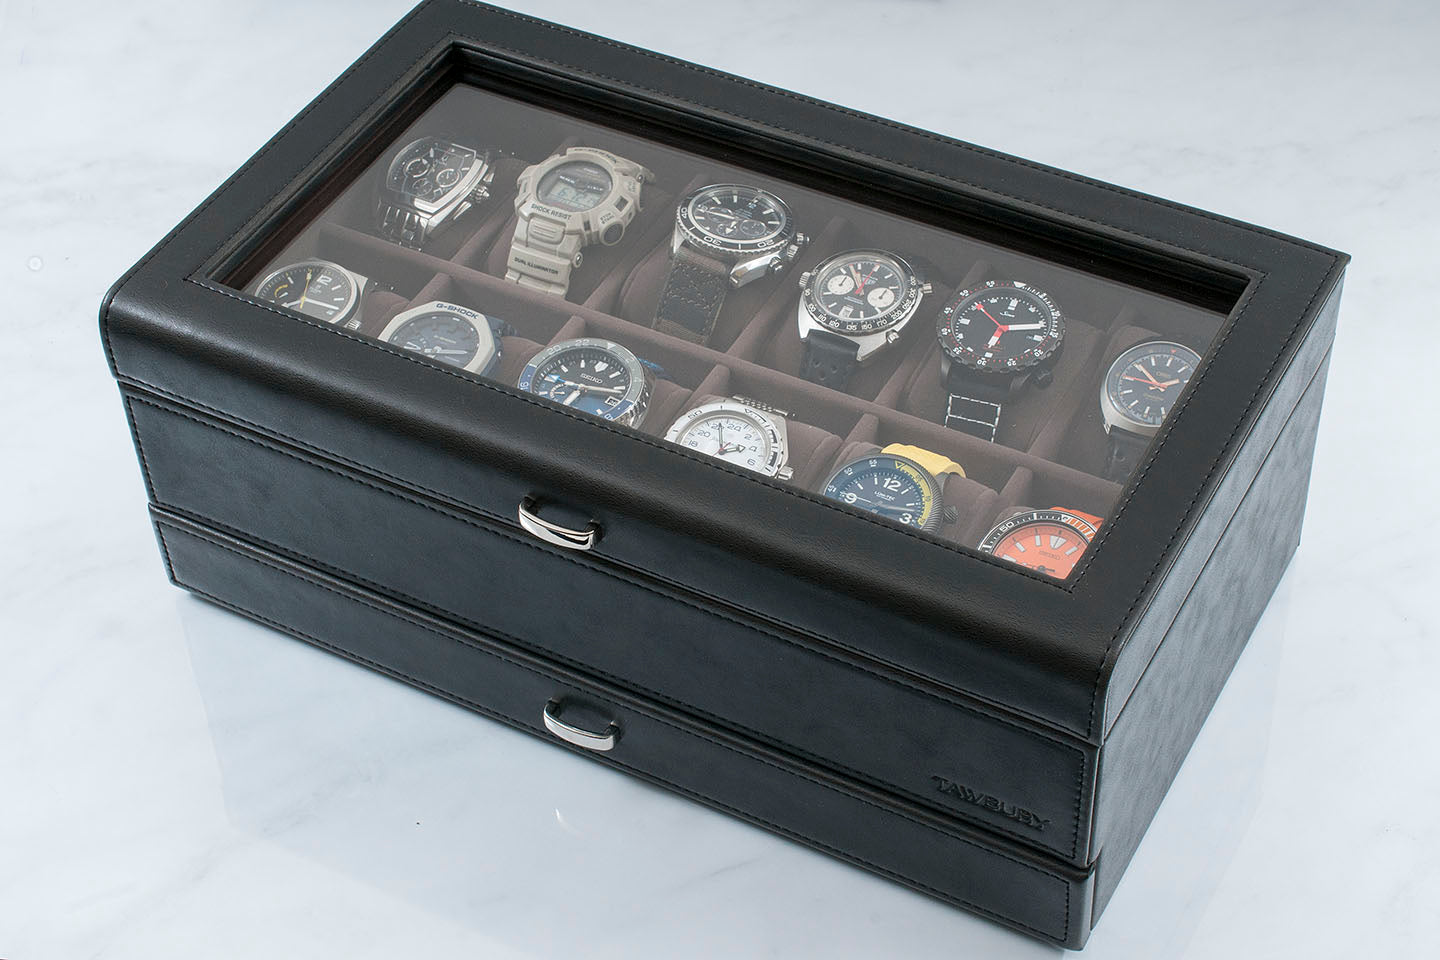 Top 20 Luxury Watch Brands in The World  Leather watch box, Watch storage  box, Watch storage